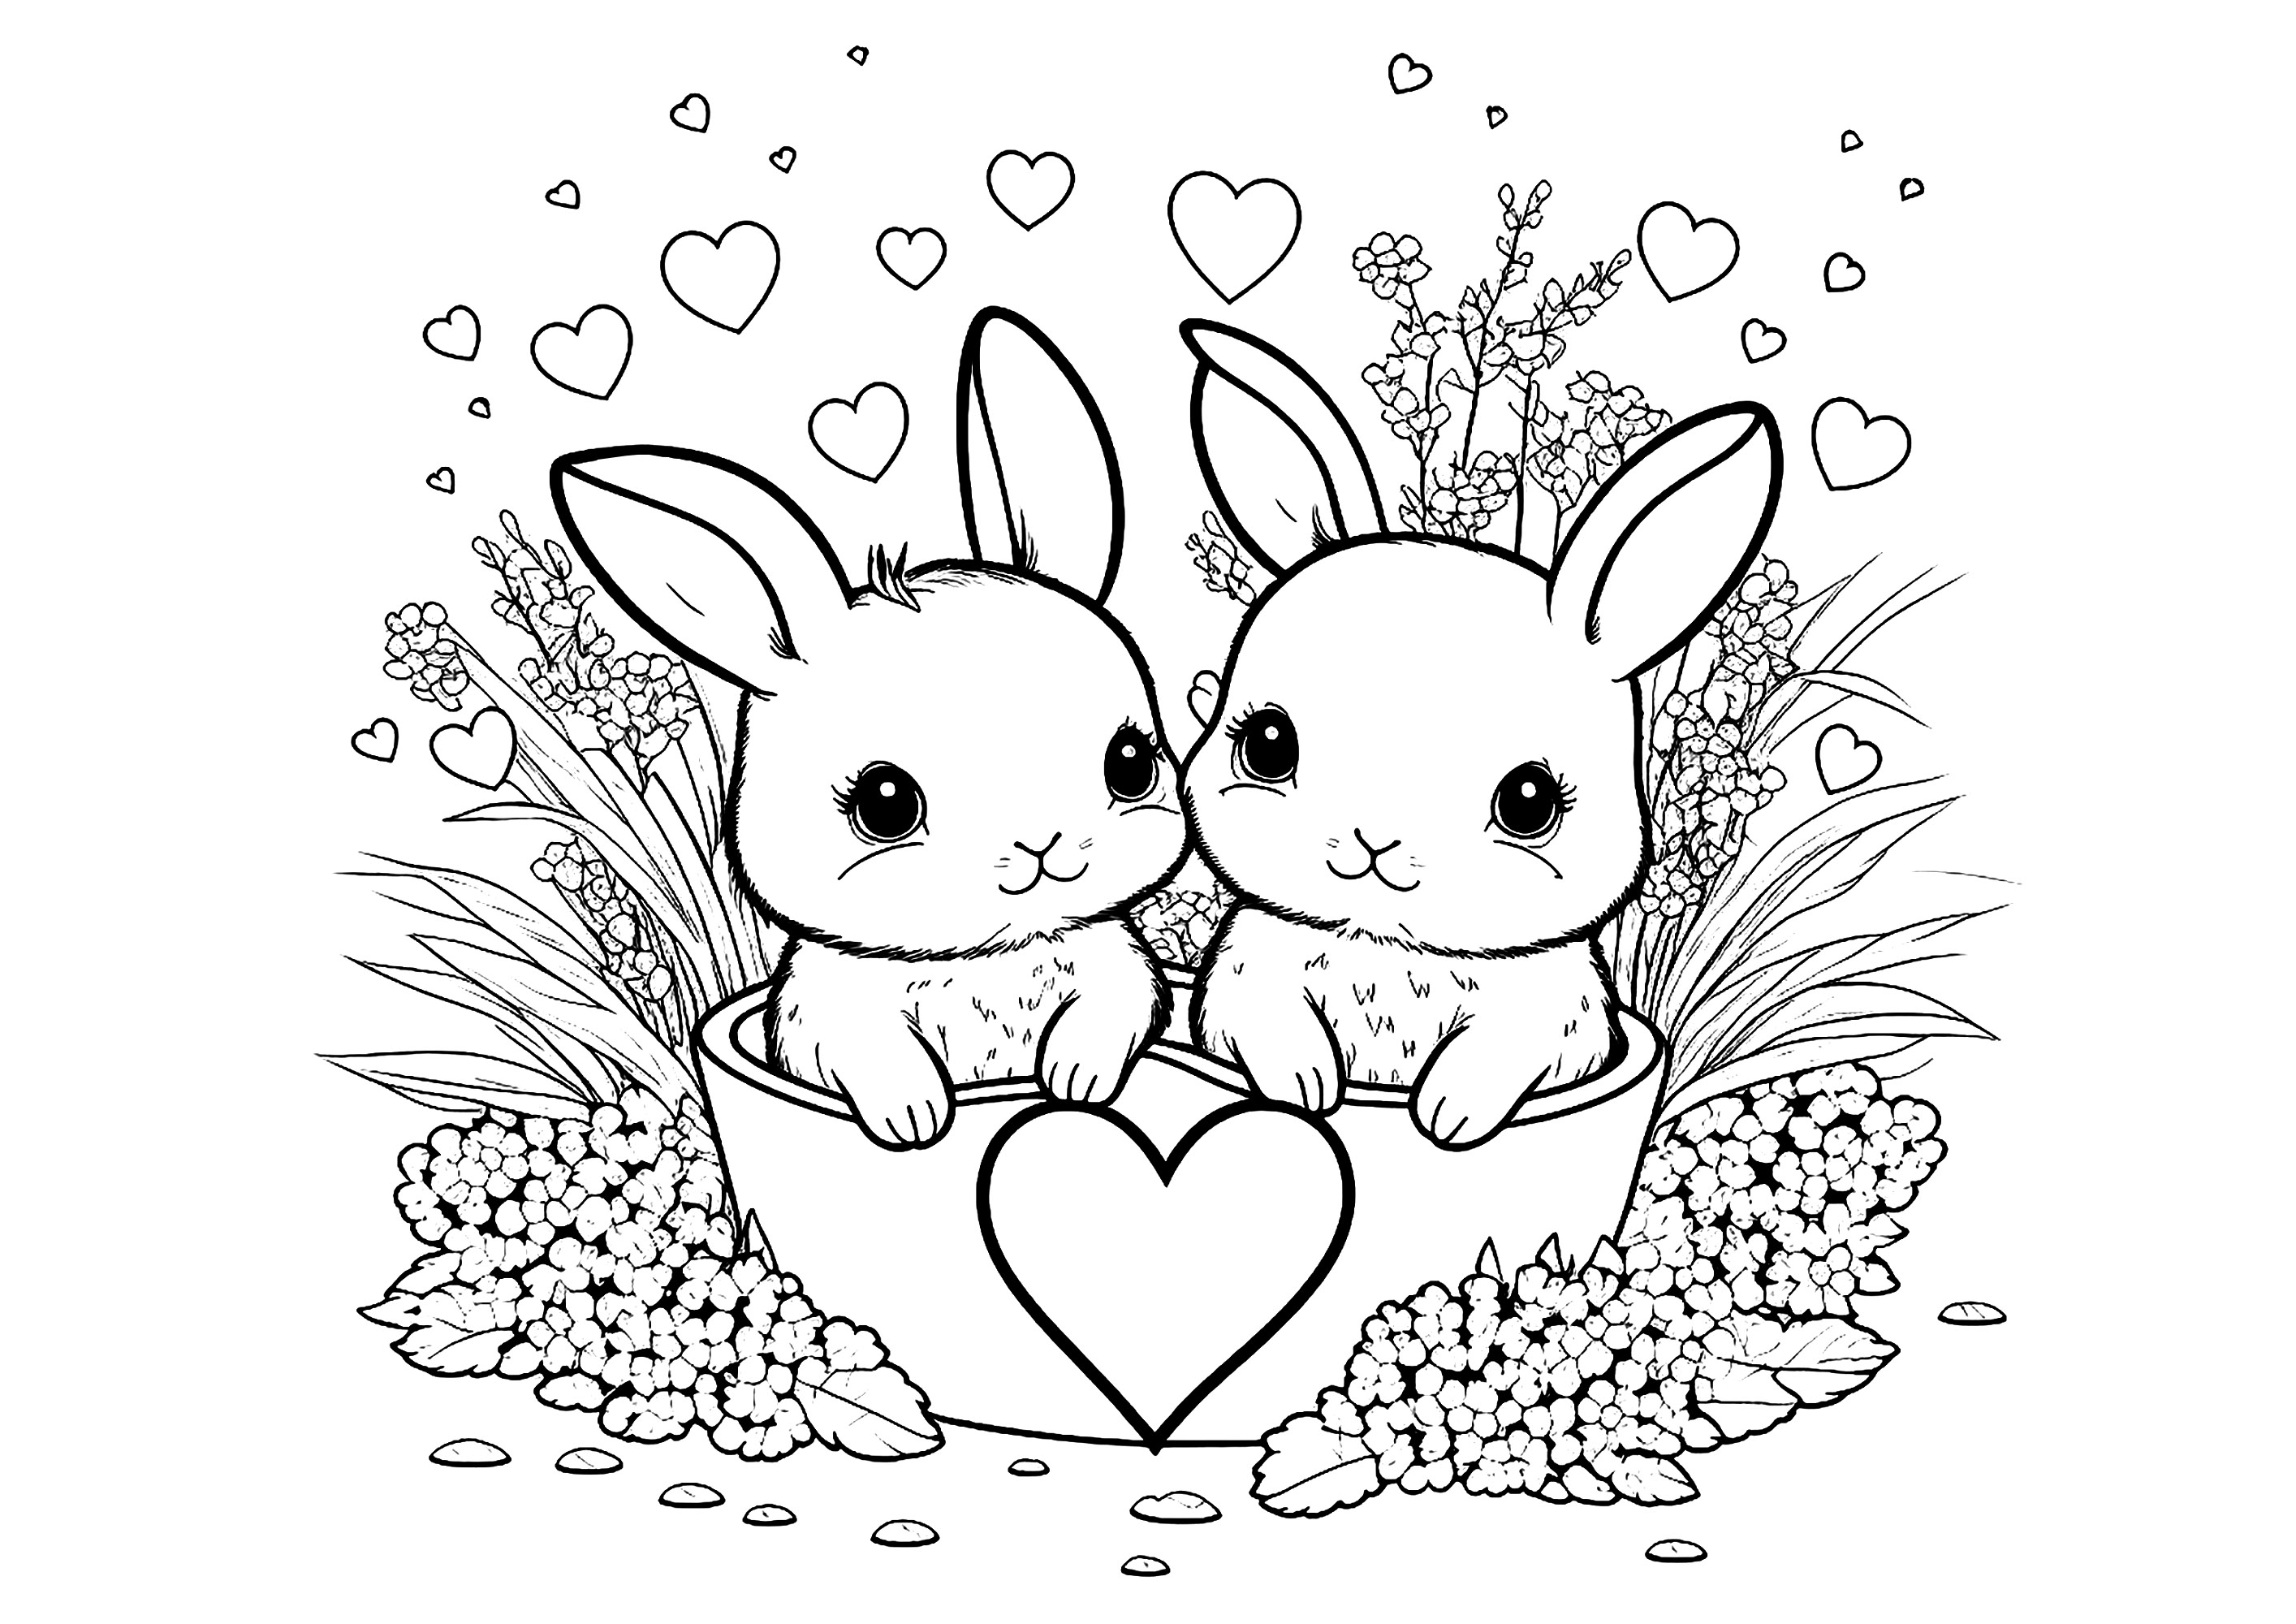 Two little bunnies to color, with a pretty heart in the middle of the two